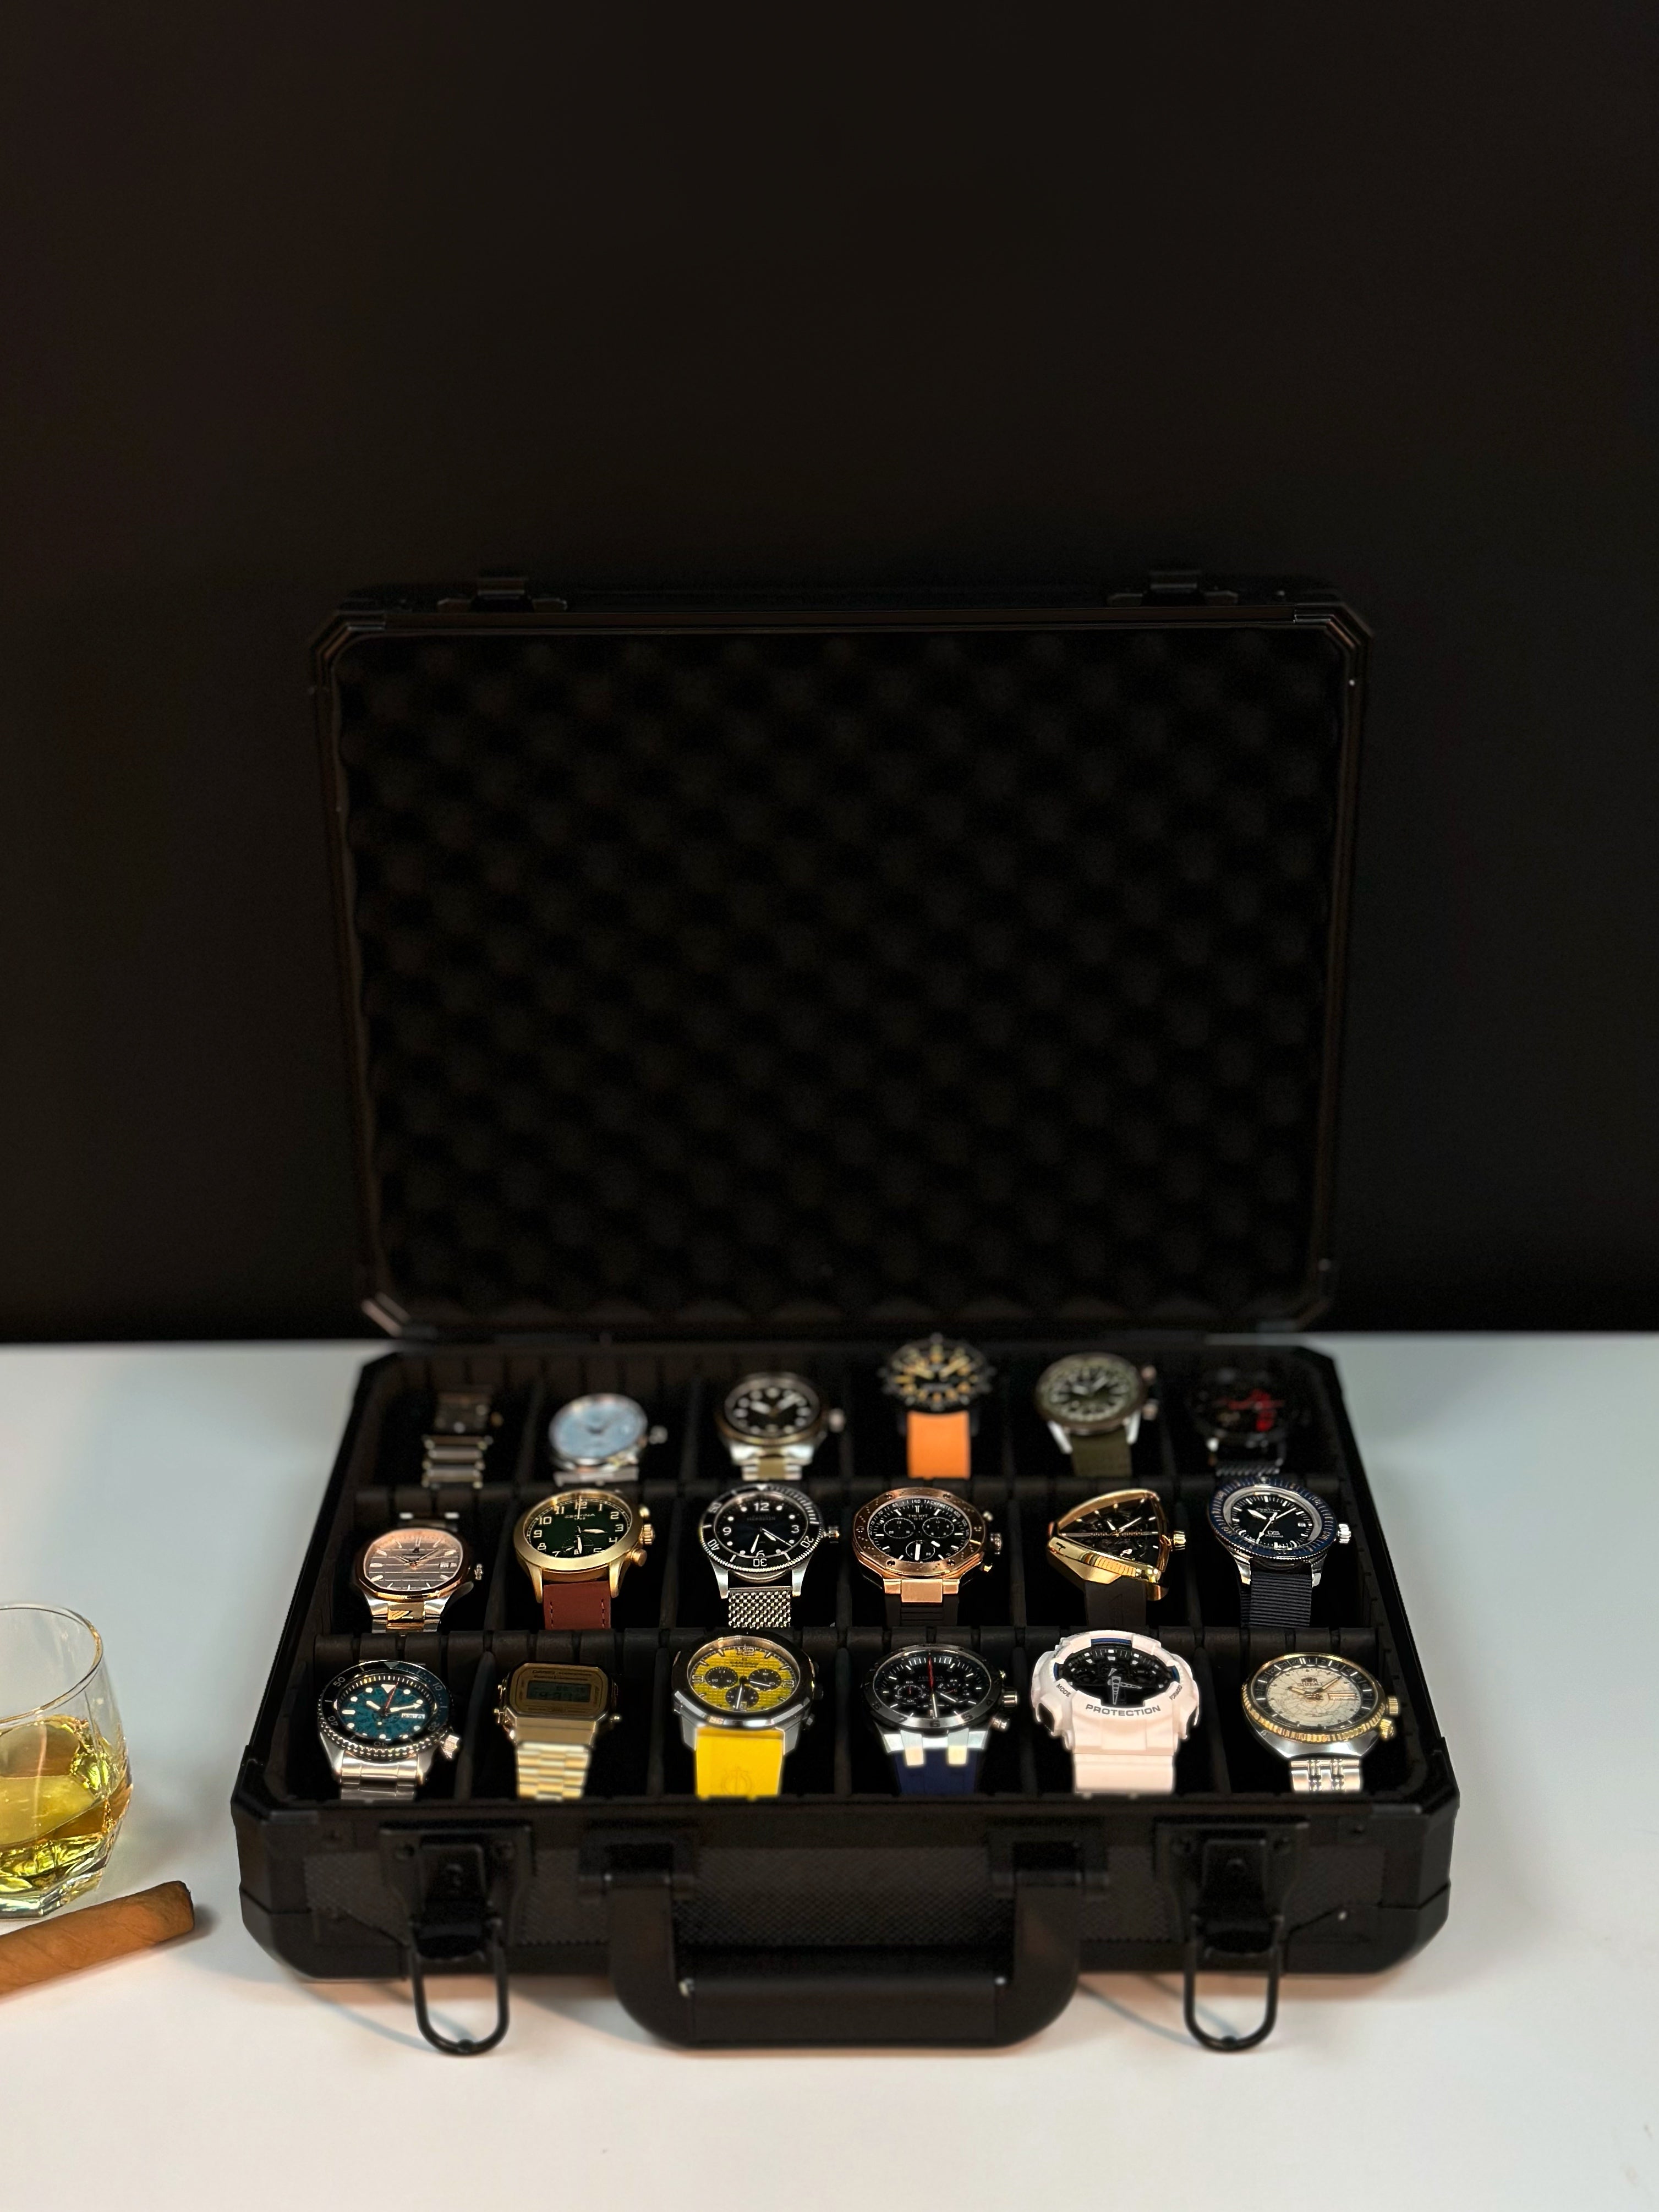 Elegant watch case with multiple compartments